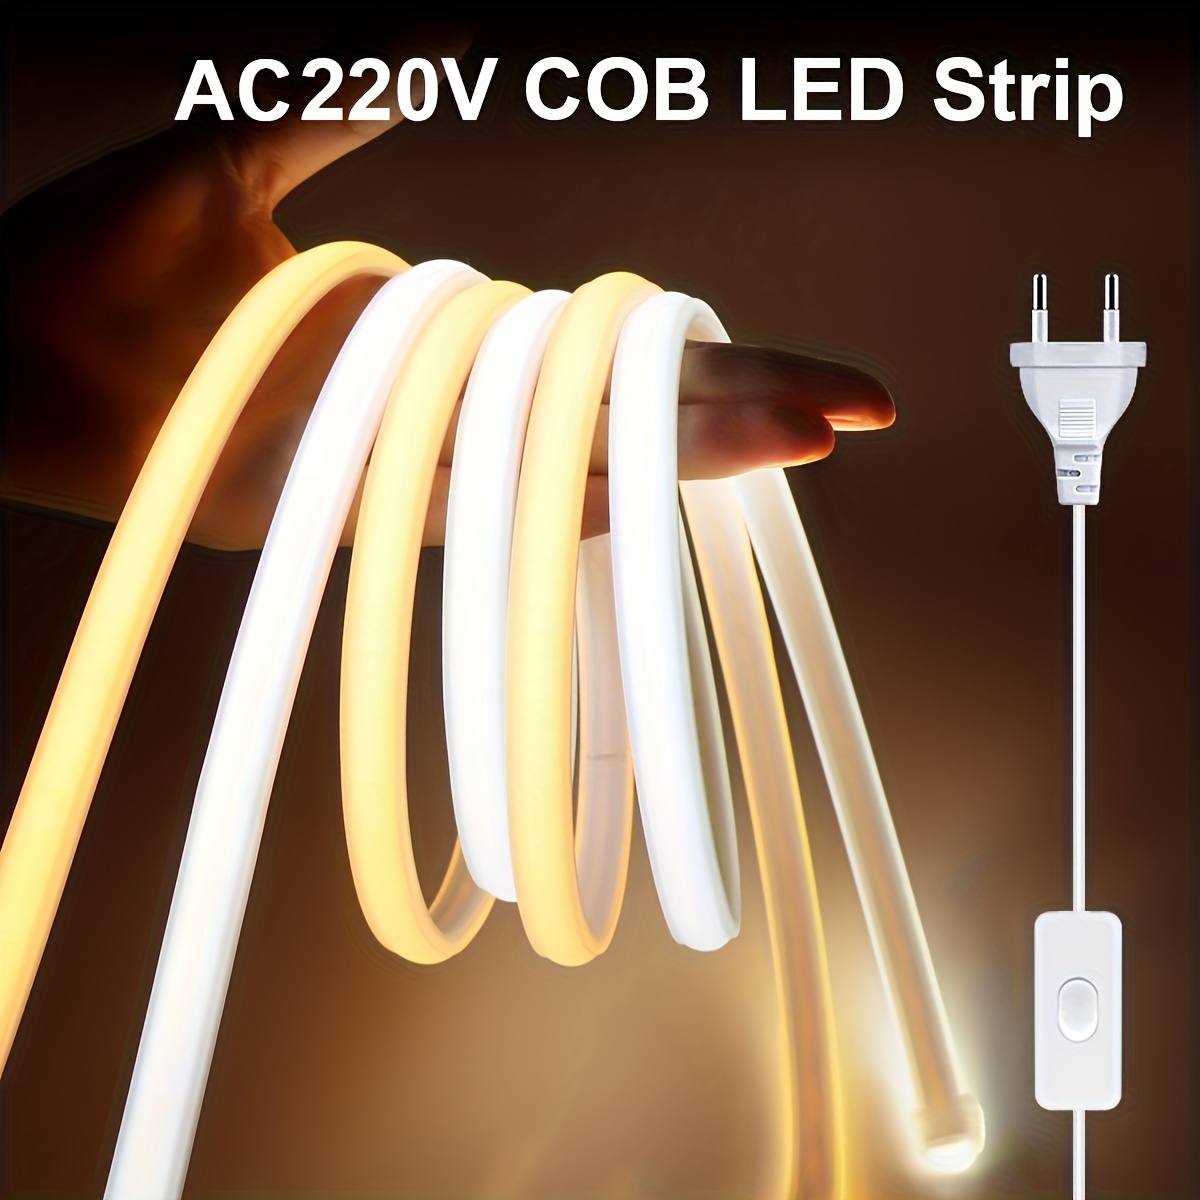 

1 Pack 220v Cob Flexible Led Strip, 288leds/m Waterproof, 12w/m Led Strip Lights, 1m Cuttable Outdoor Garden Led Strip Light For Kitchen Bedroom, Free Accessories And 1.2m Eu Plug With Switch